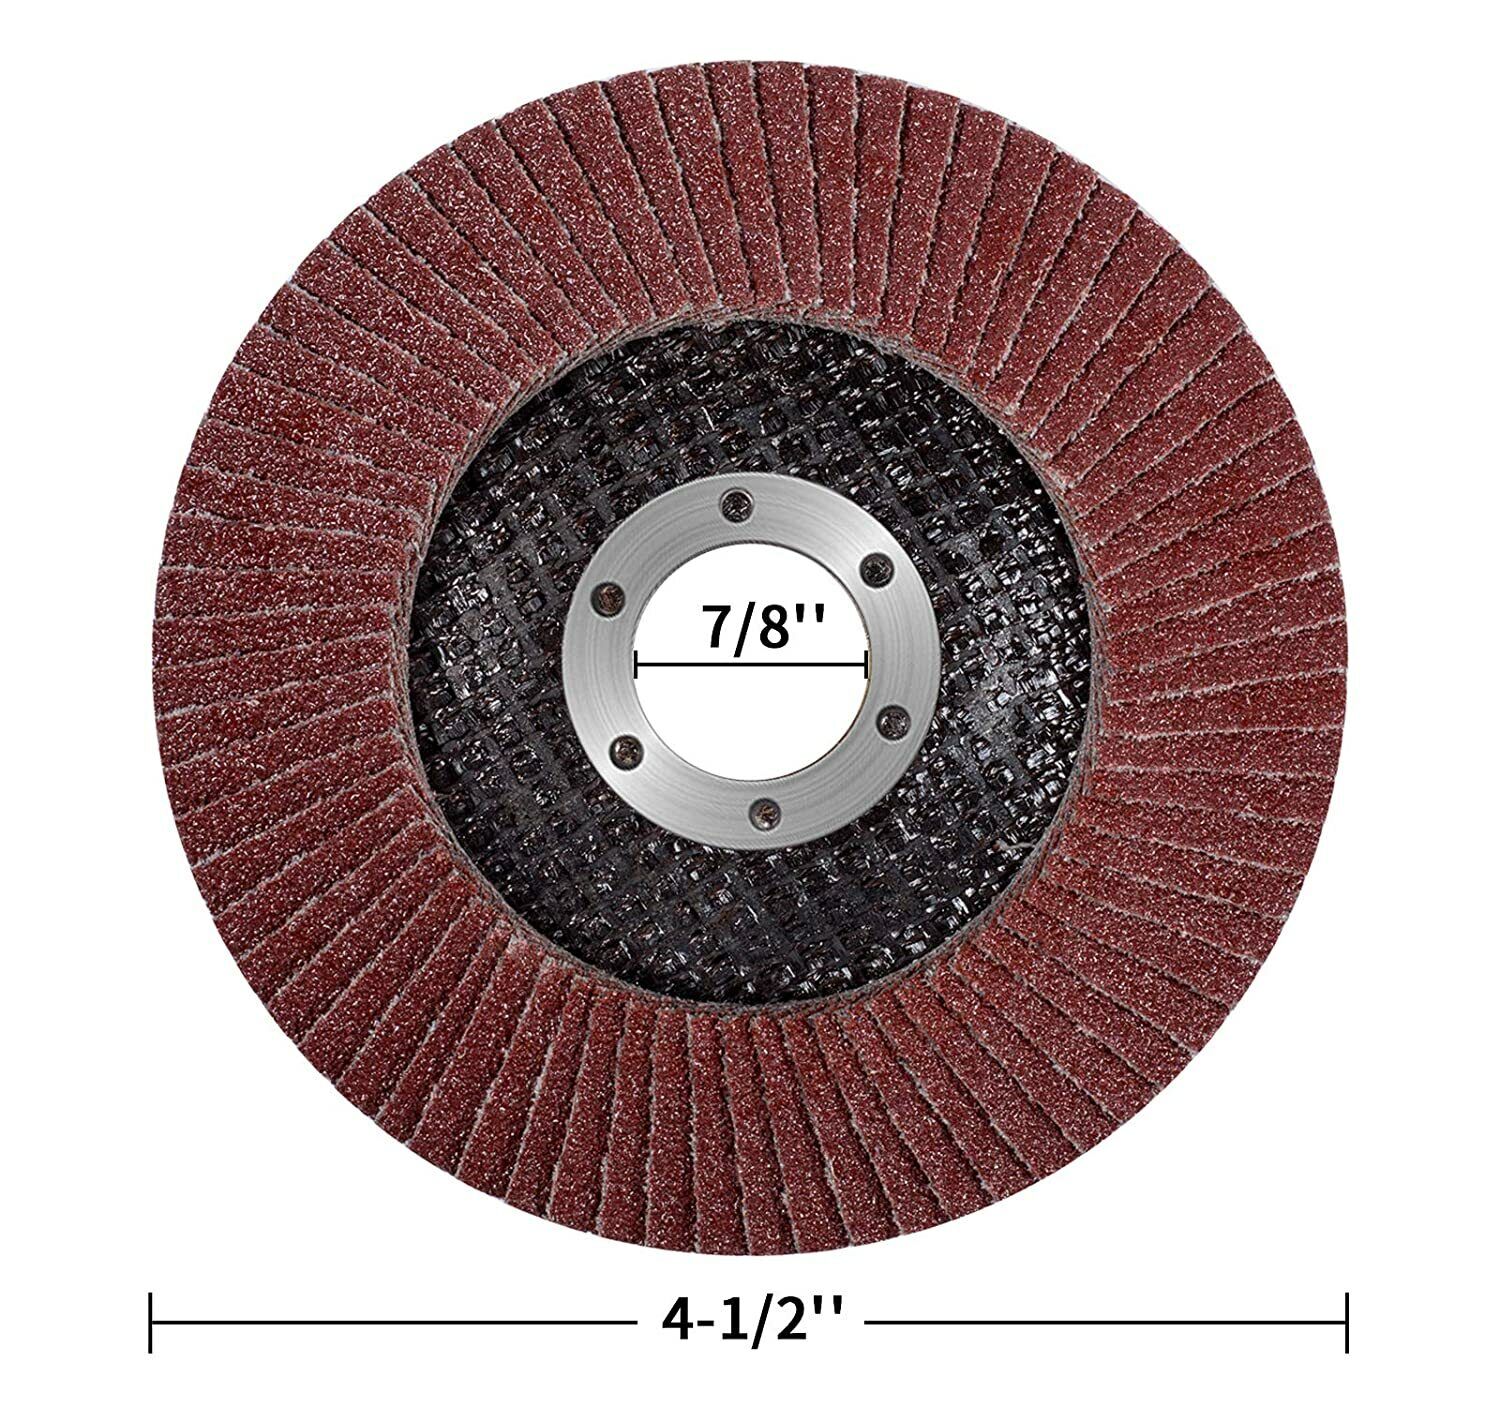 20x 4.5" 4-1/2 Flap Disc 40 60 80 120 Grit Angle Grinder Sanding Grinding Wheels Satc Does Not Apply - фотография #6